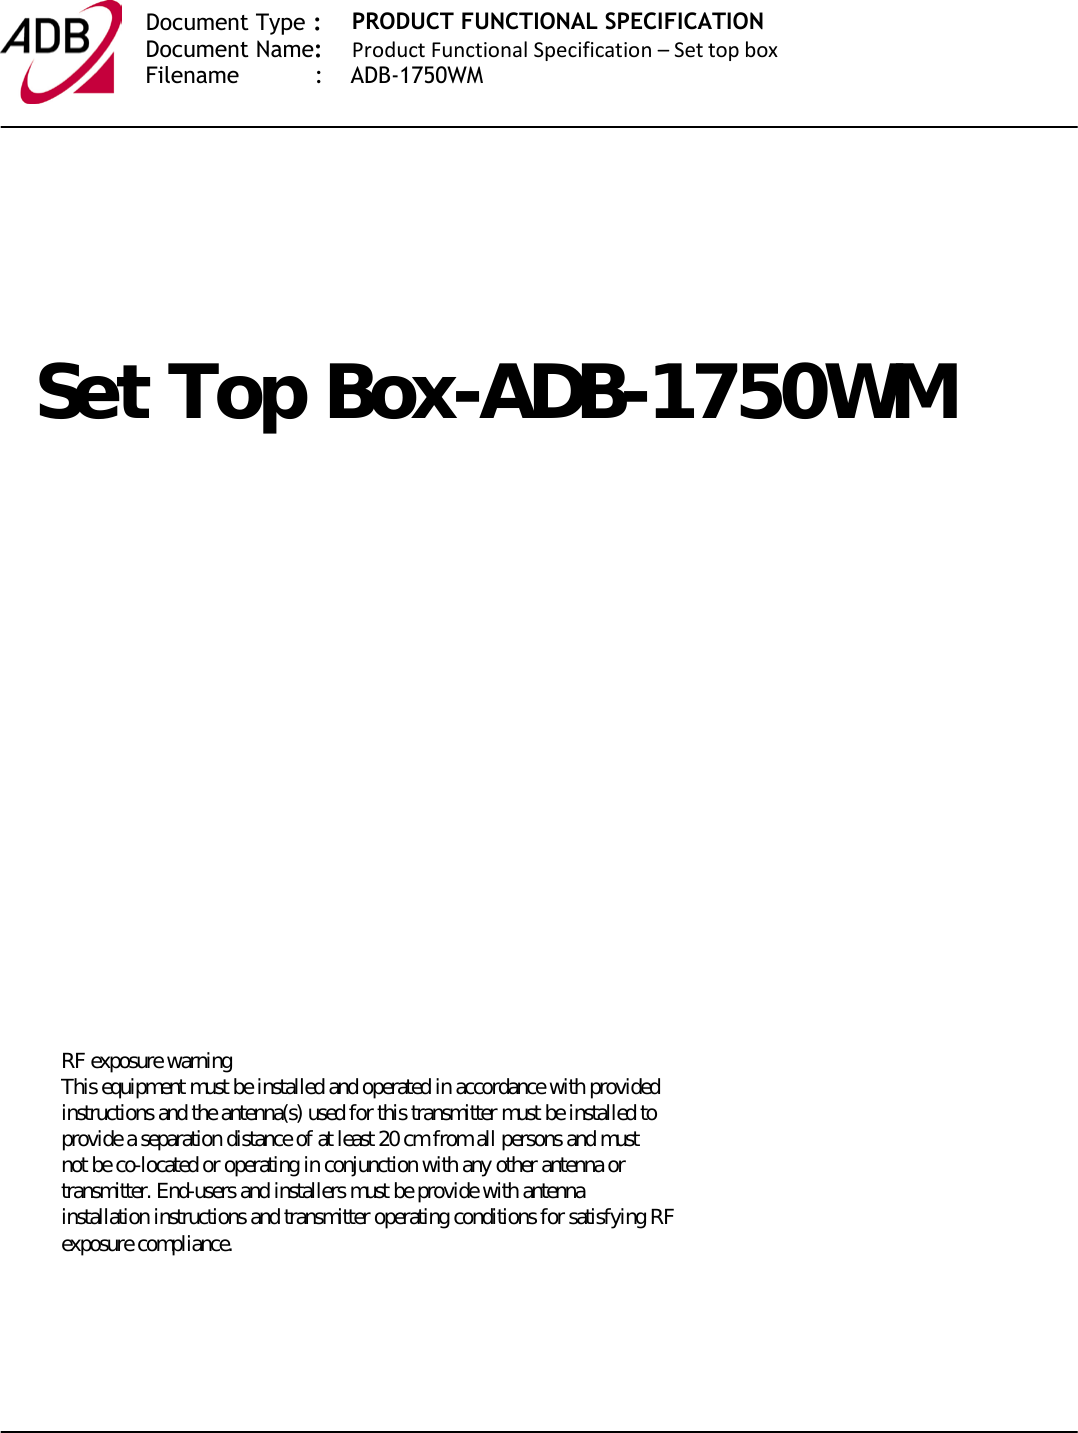   Document Type :  Document Name:  Filename           :    ADB-1750WMPRODUCT FUNCTIONAL SPECIFICATION Product Functional Specification – Set top box                    .    6HW7RS%R[$&apos;%:0   RF exposure warning This equipment must be installed and operated in accordance with provided instructions and the antenna(s) used for this transmitter must be installed to provide a separation distance of at least 20 cm from all persons and must not be co-located or operating in conjunction with any other antenna or transmitter. End-users and installers must be provide with antenna installation instructions and transmitter operating conditions for satisfying RF exposure compliance.